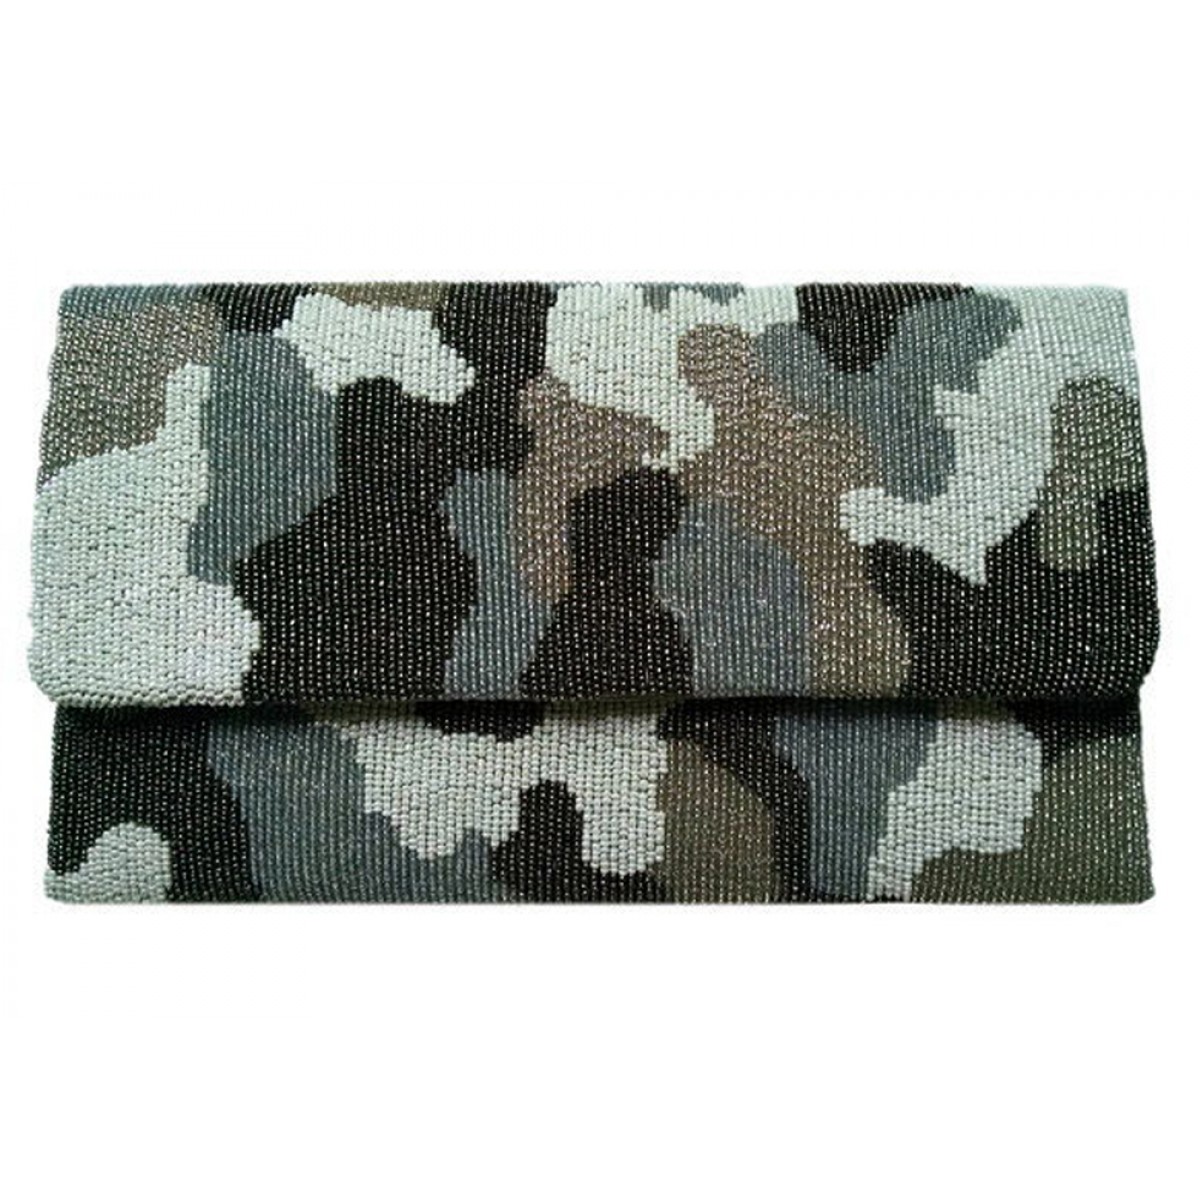 Camouflage Beaded Large Clutch